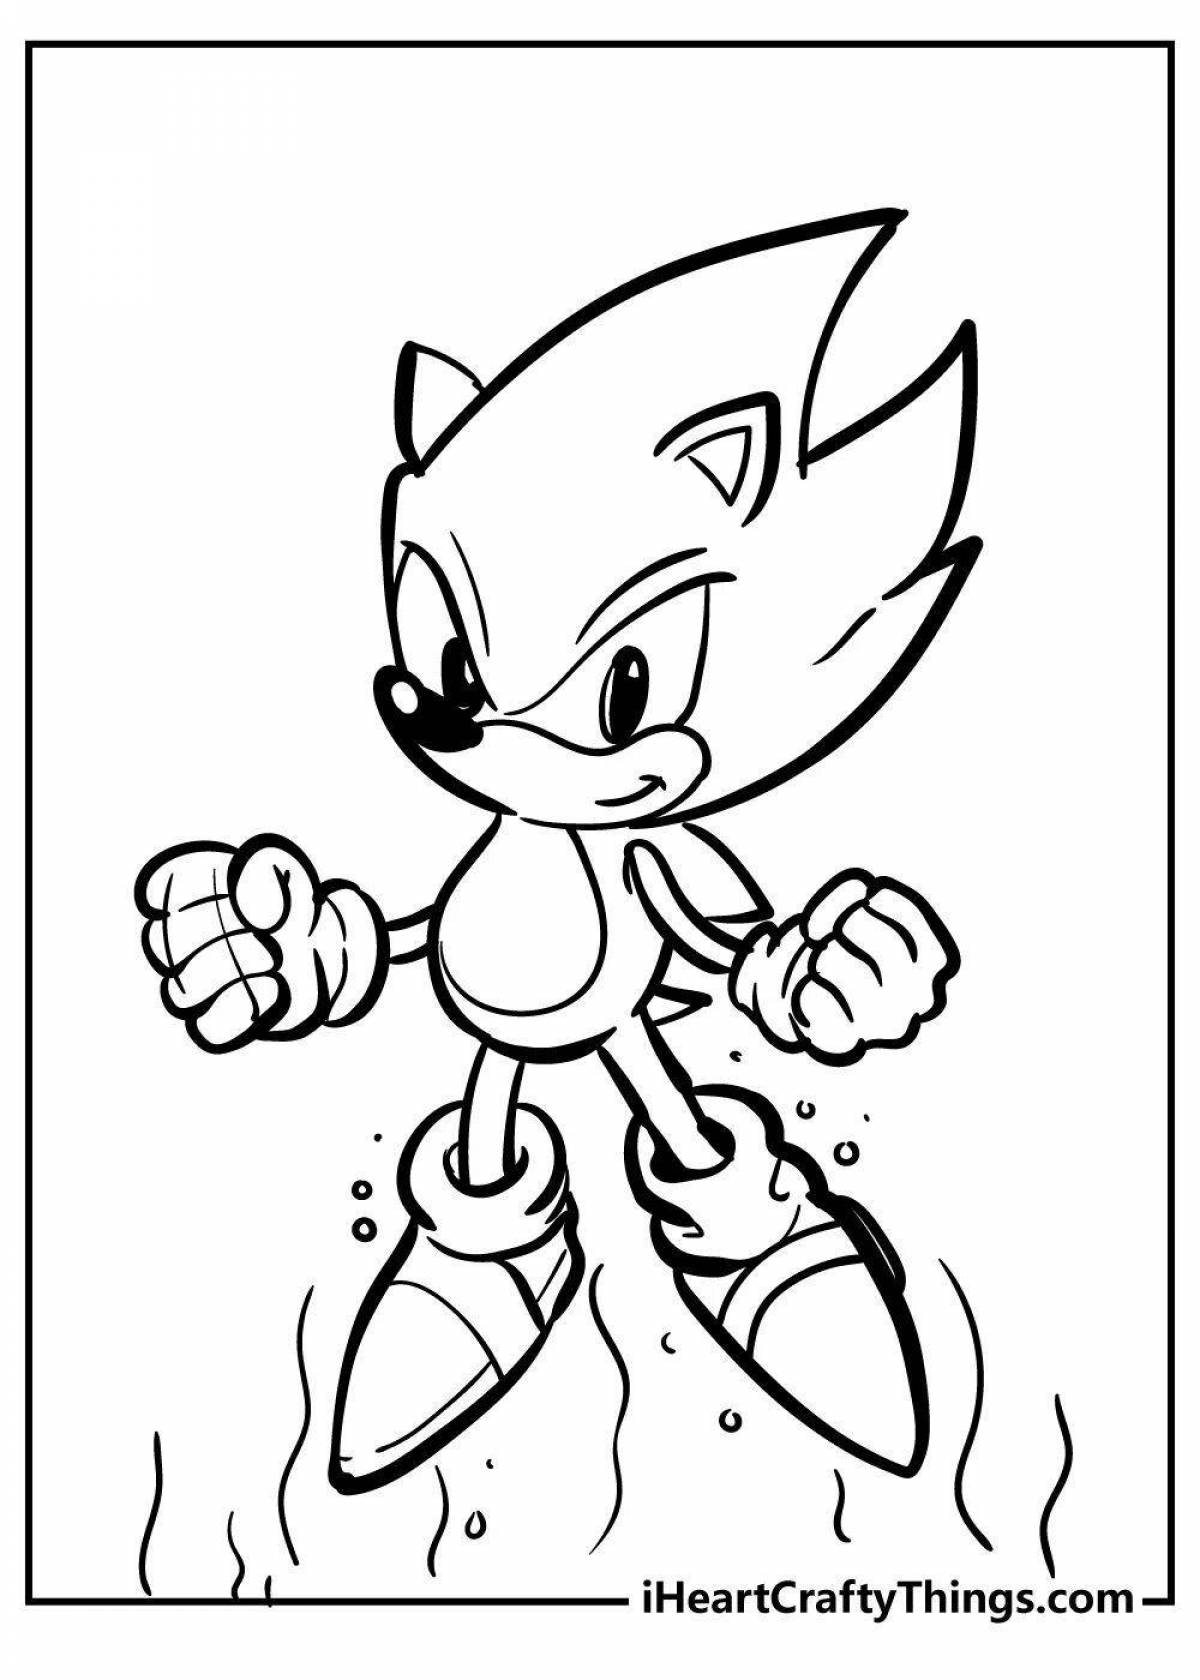 Great coloring sonic with crystals